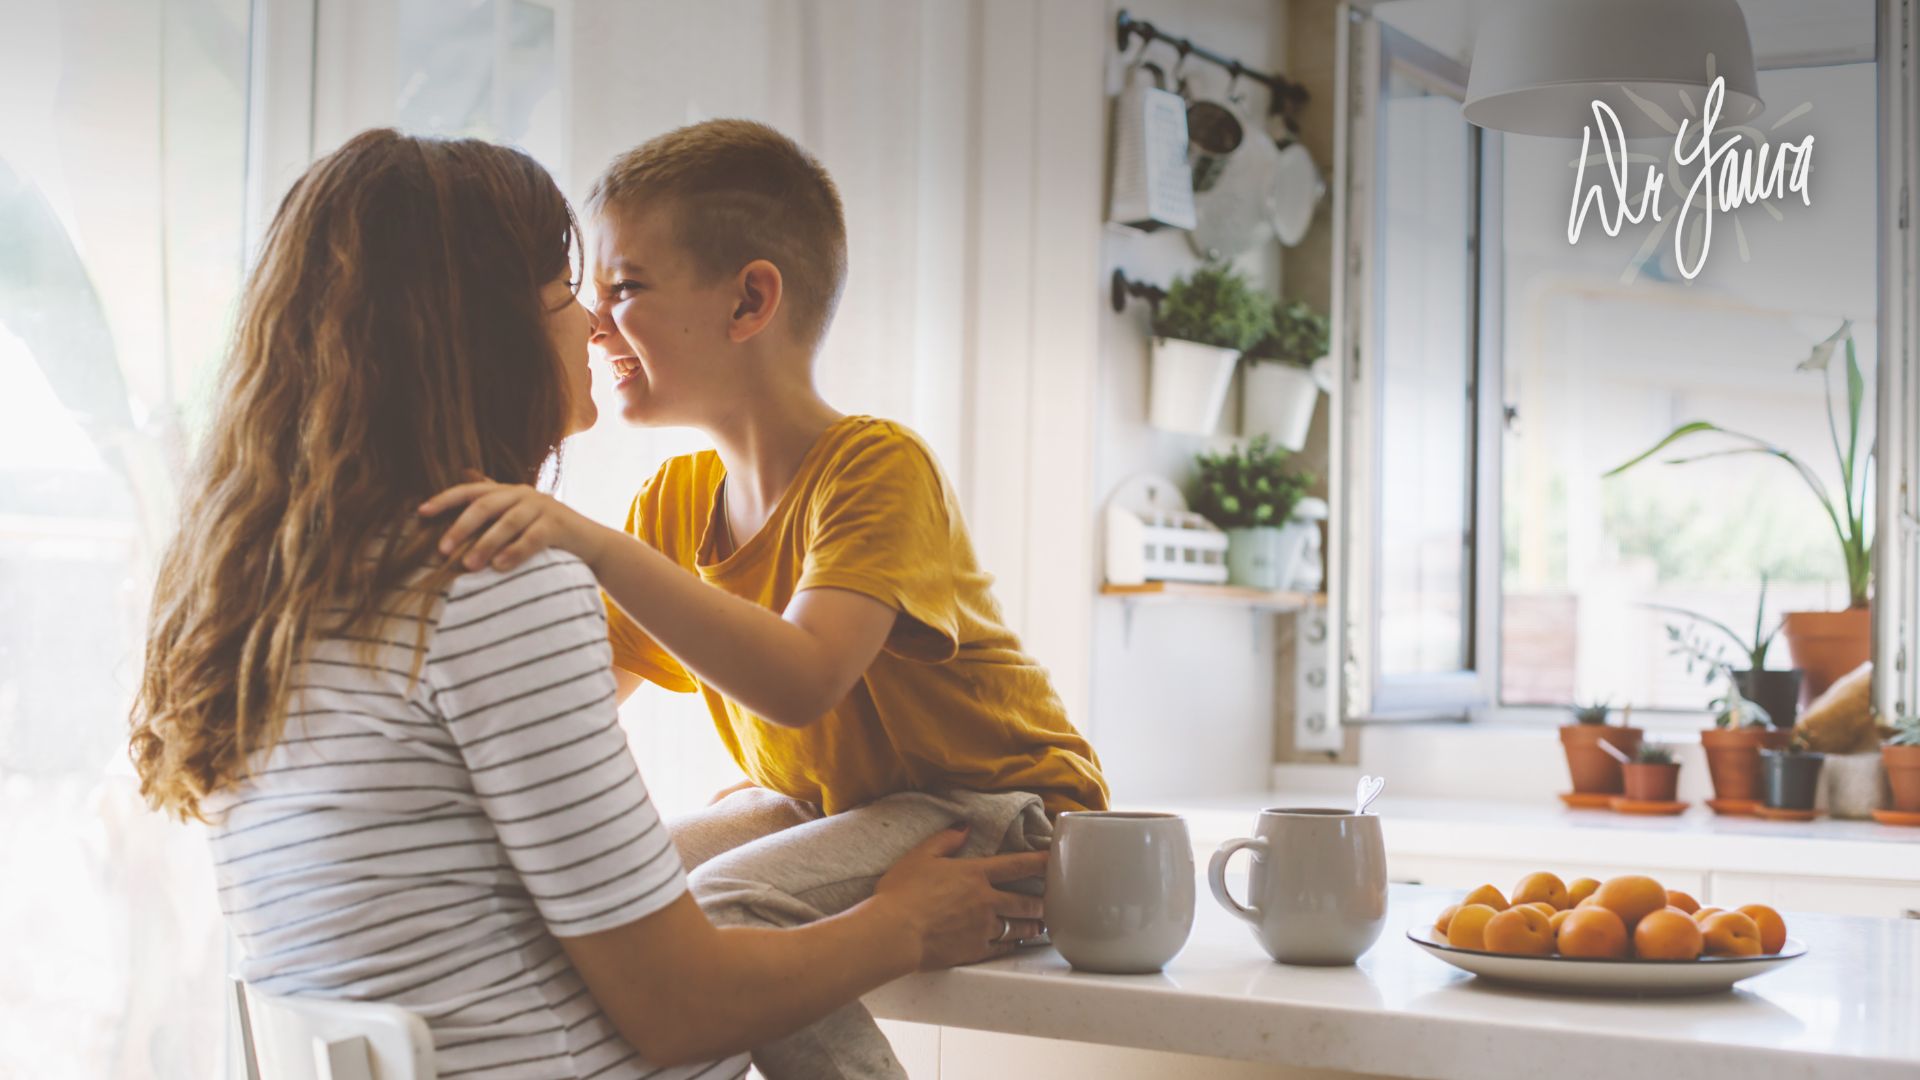 Blog: 4 Ways You Can Boost Self-Worth as a New Stay-at-Home Mom